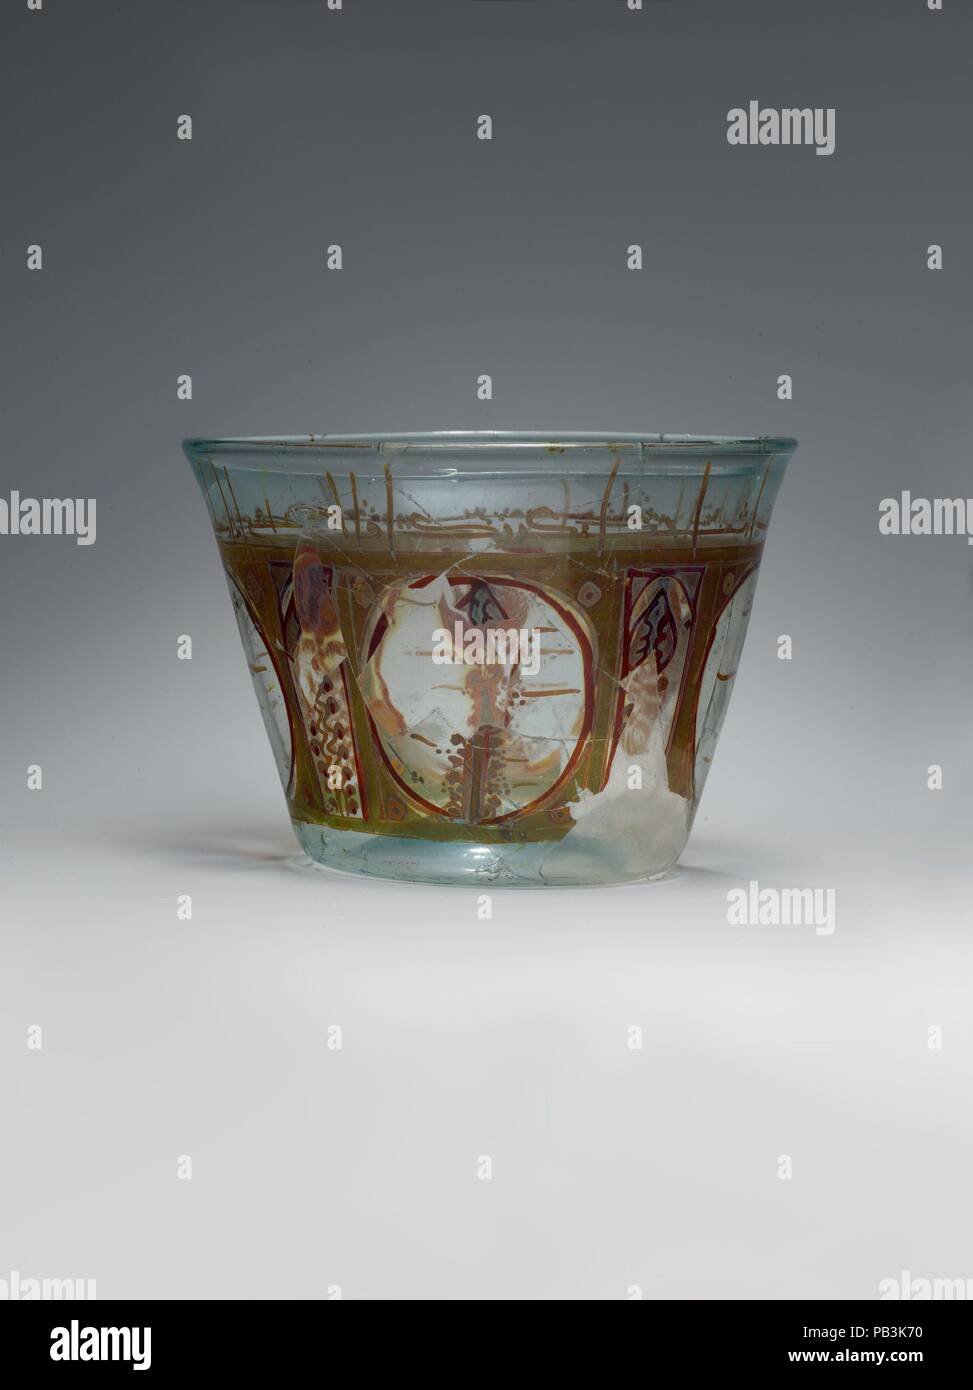 Glass Bowl. Dimensions: H. 4 3/16 in. (10.7 cm)  Max. Diam. 6 in. (15.3 cm). Date: late 10th-early 11th century.  The shape, size, and decoration of this bowl demonstrate an affinity between luster-painted glass and ceramic lusterware. The division of the vessel walls into panels and the stylized palmette-tree motifs frequently appear on luster-painted bowls made in Fatimid Egypt. The Arabic inscription around the rim, in angular kufic script, has not yet been deciphered. Museum: Metropolitan Museum of Art, New York, USA. Stock Photo